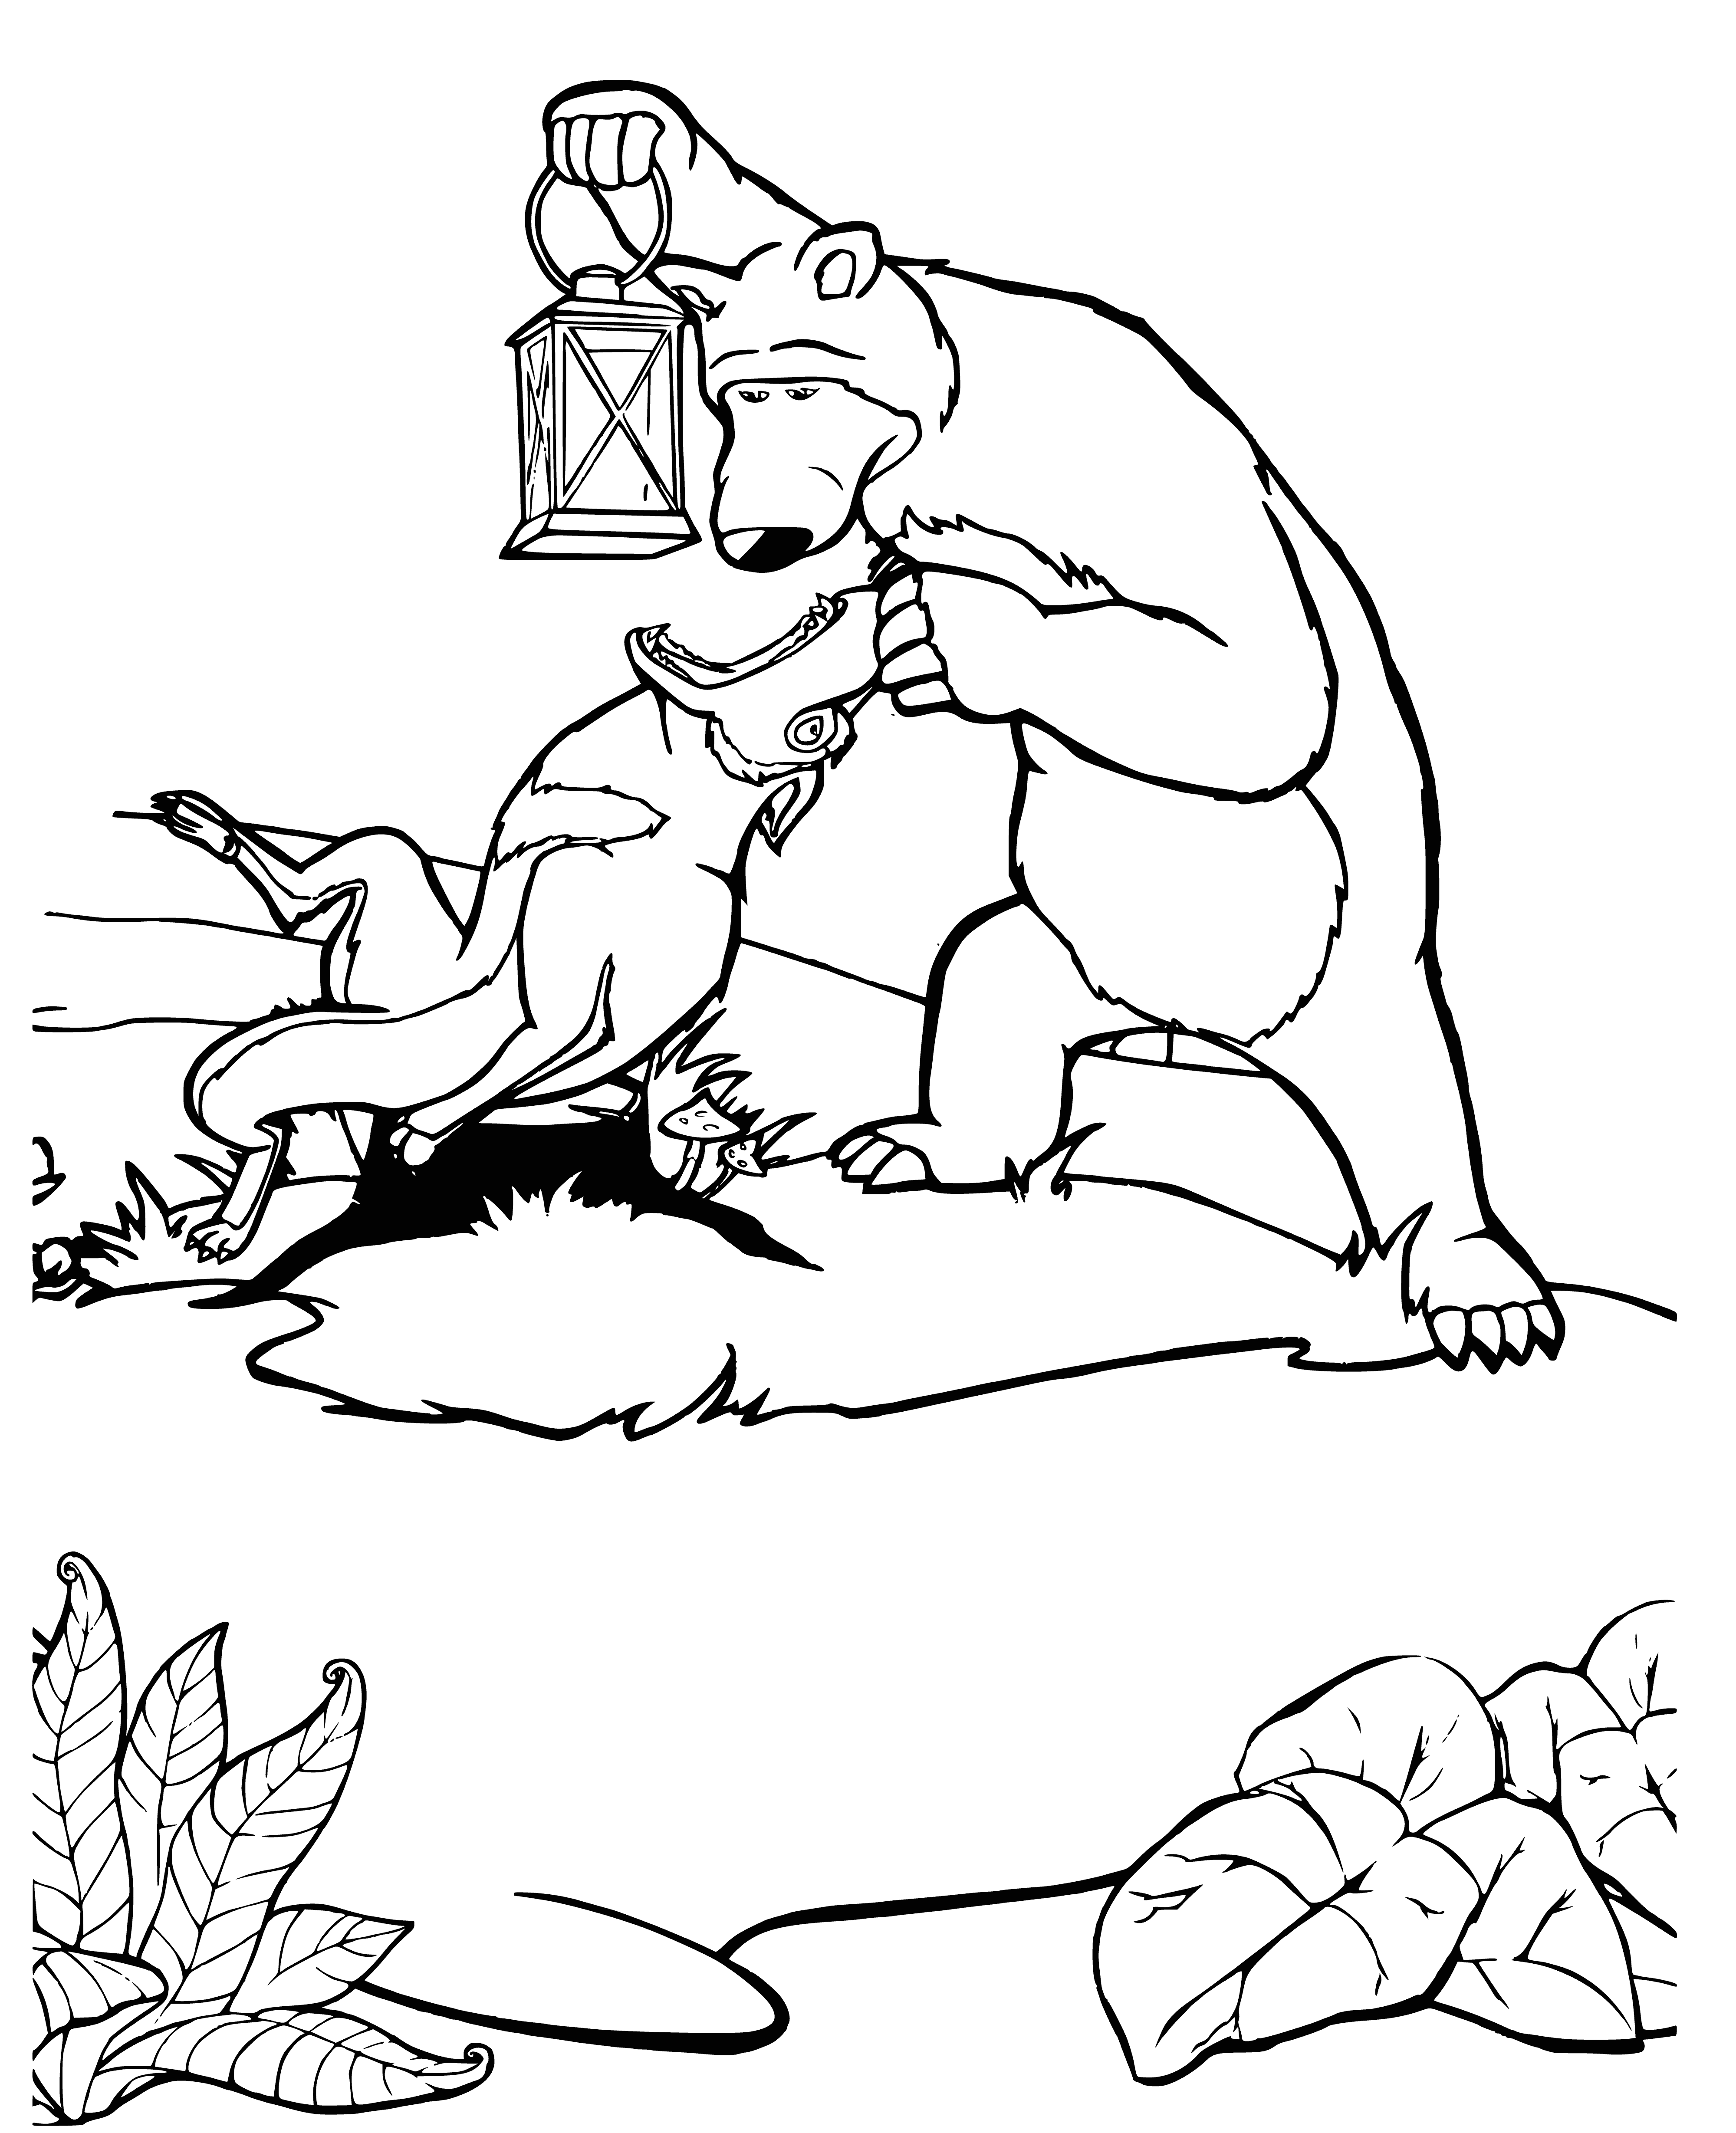 coloring page: Masha is crying and the Bear is consoling her; the Wolf has eaten her in the coloring page.